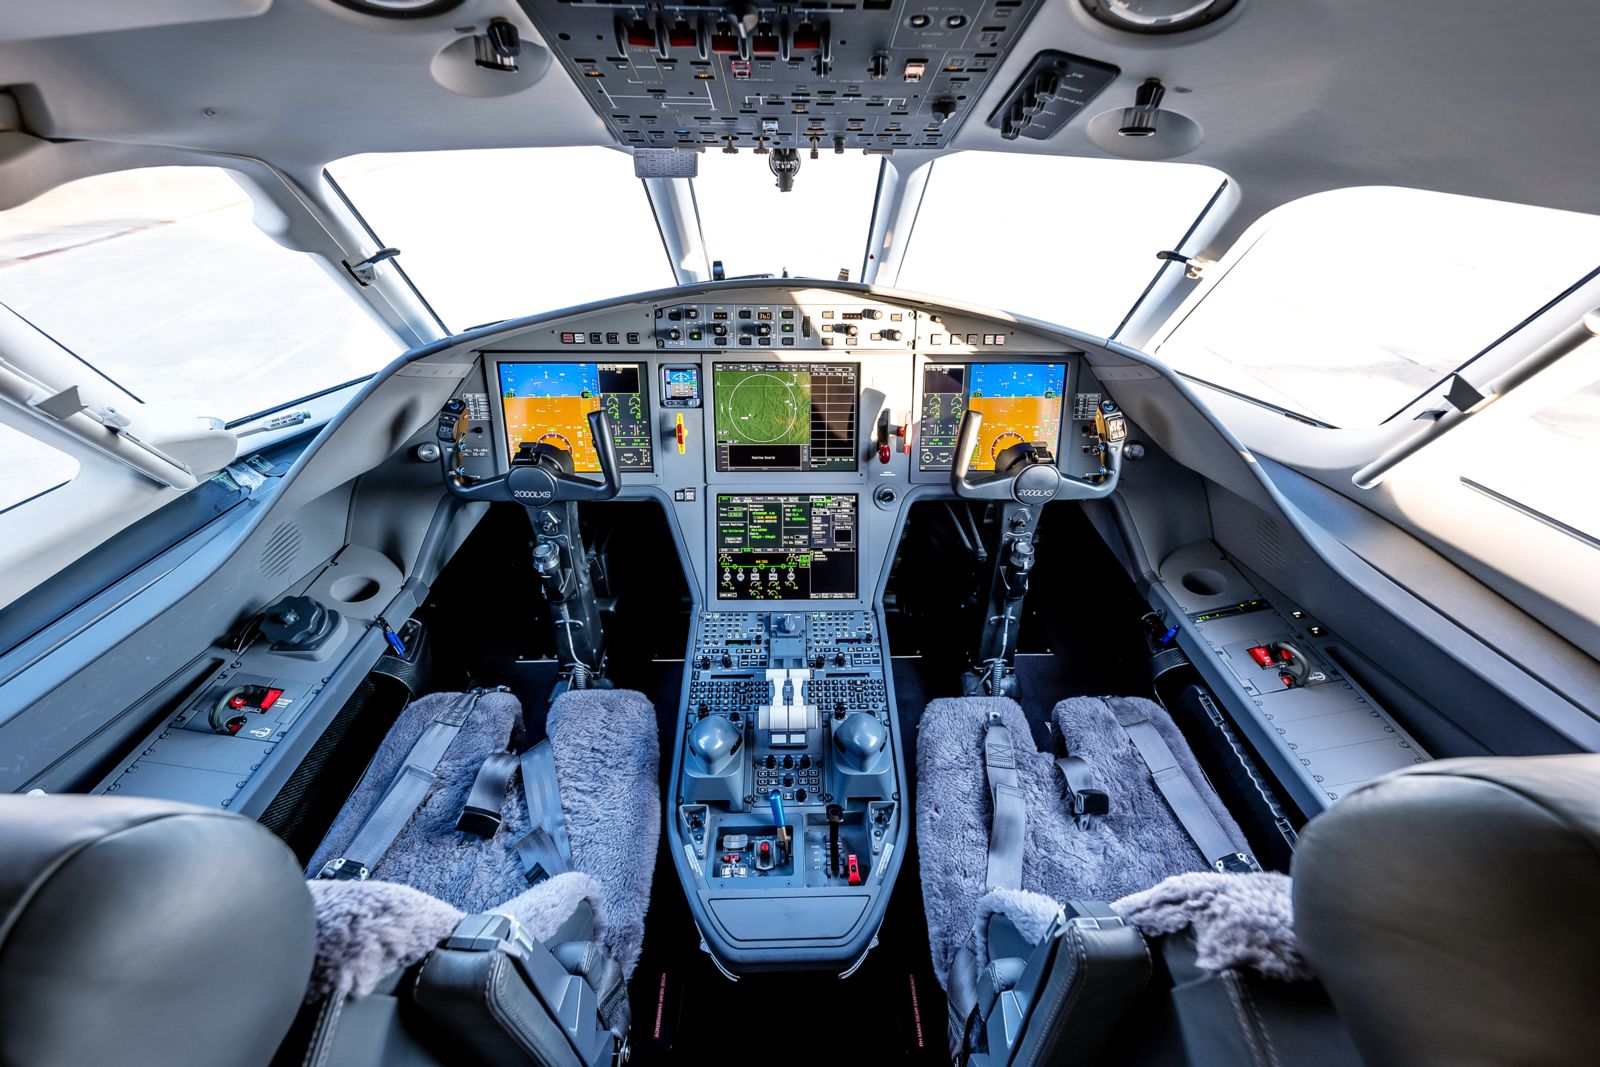 Dassault Falcon 2000LXS  S/N 370 for sale | gallery image: /userfiles/images/falcon%202000_ps-ara_cockpit_ago23-2.jpg